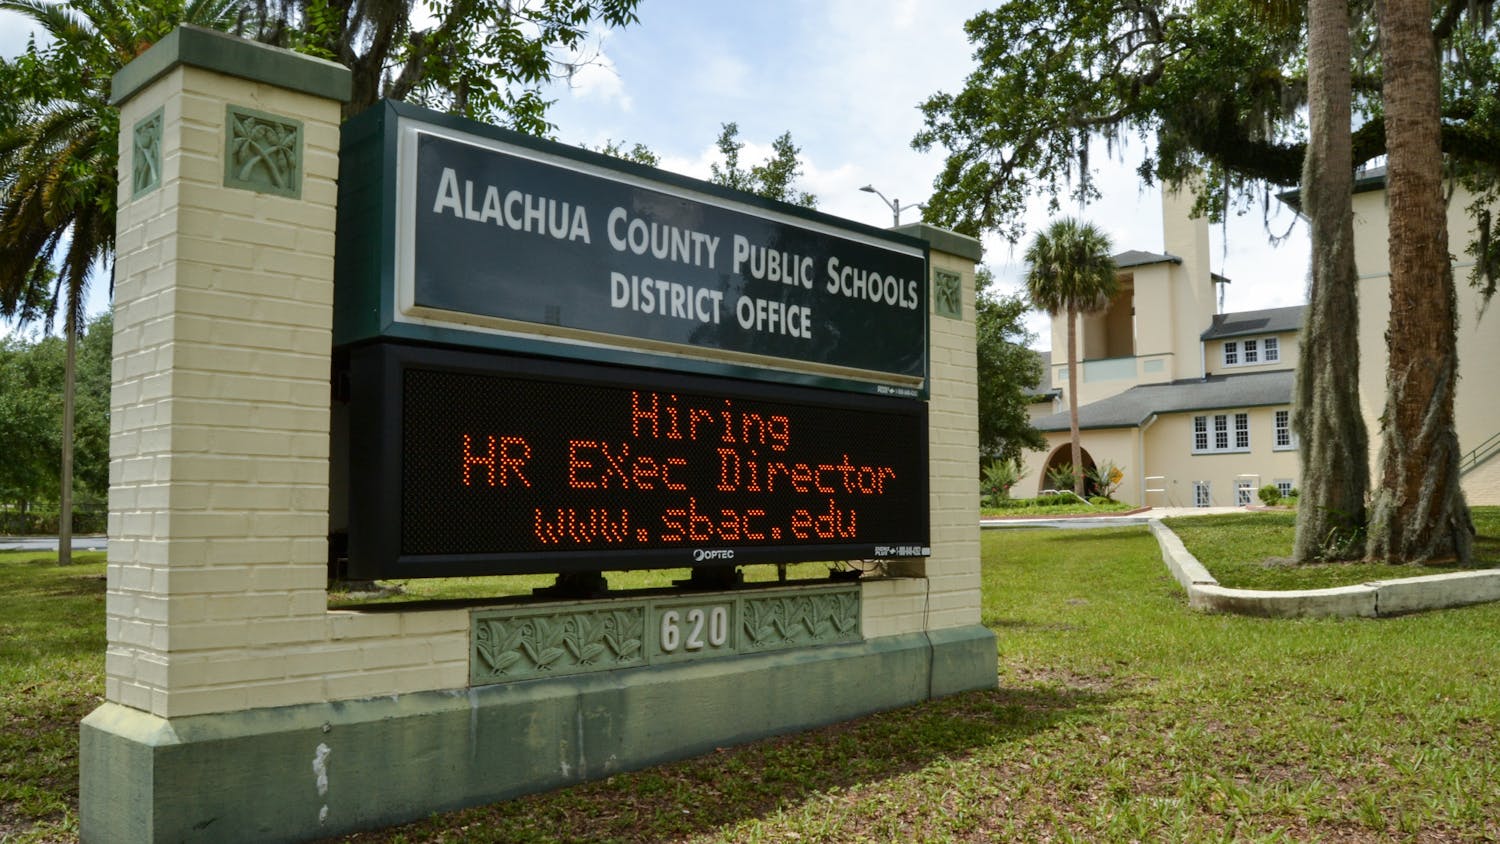 A sign in front of the Alachua County Public Schools district office building is seen Sunday, June 6, 2021.